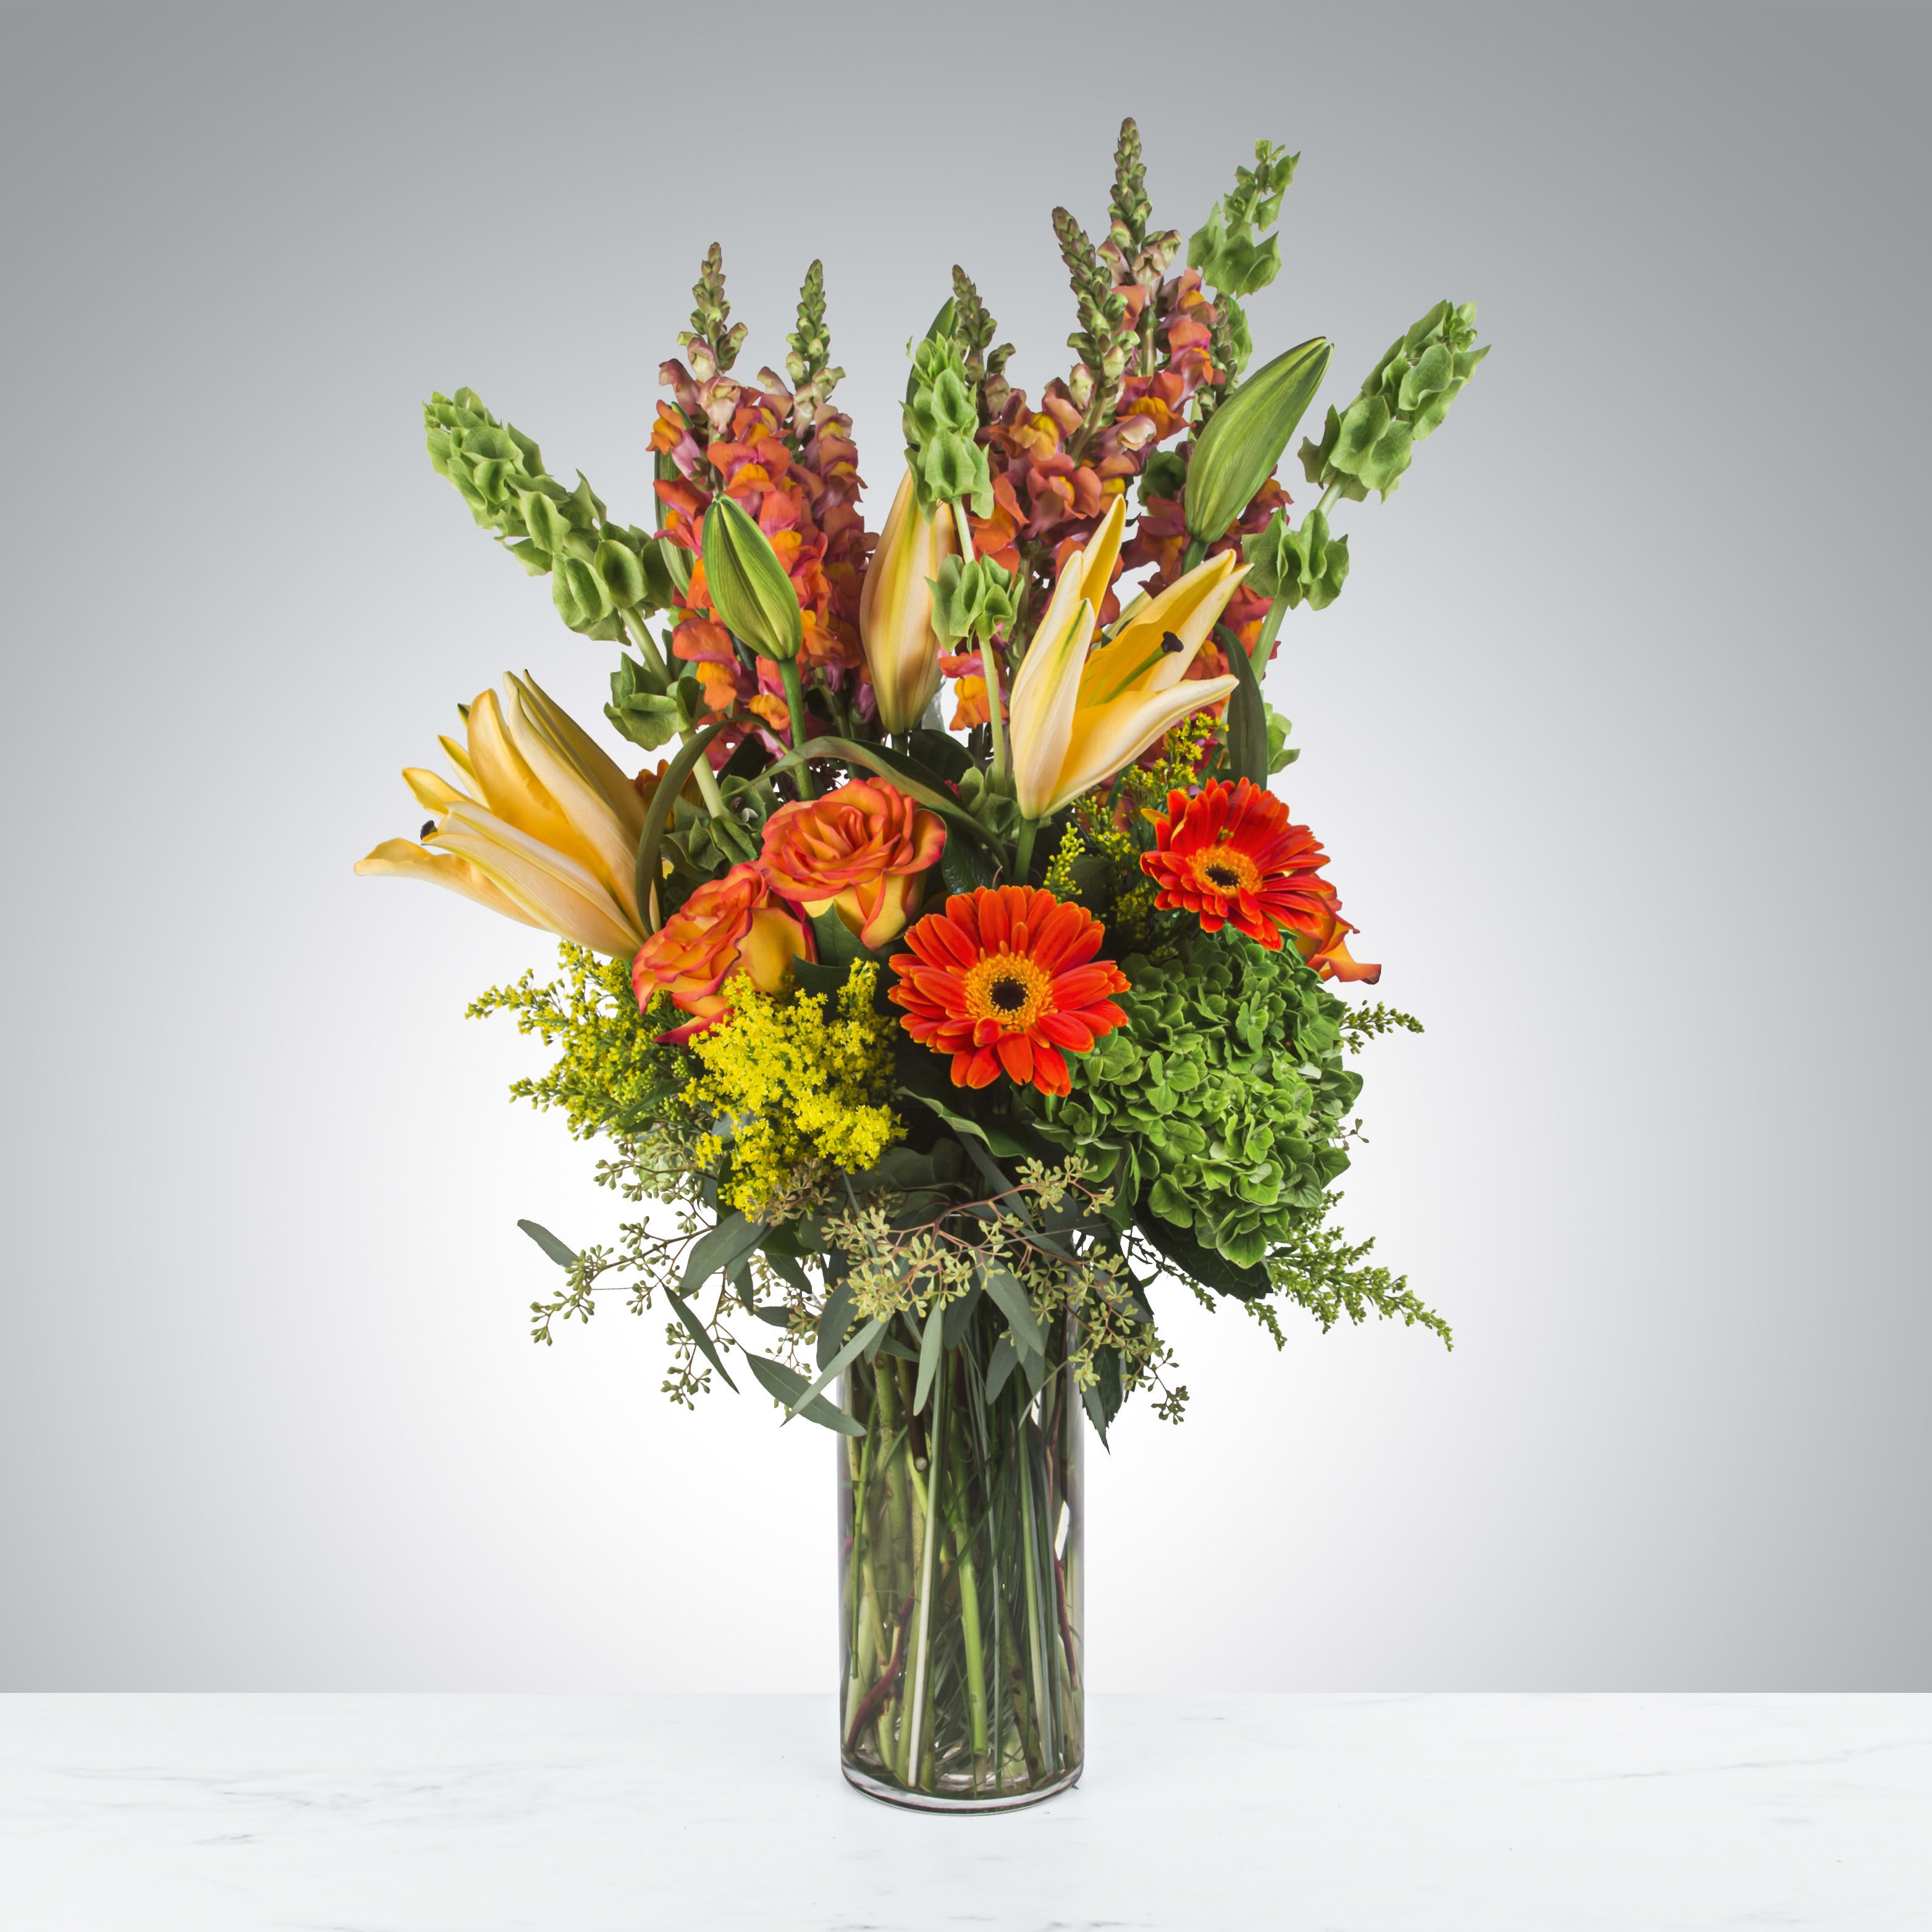 Buenos Dias by BloomNation™ - Say &quot;Buenos Dias&quot; to a bright and cheerful day with our stunning Buenos Dias Flower Arrangement. This vibrant arrangement features a beautiful mix of orange gerbera daisies, green bells of Ireland, green hydrangea, roses, and orange lilies, all beautifully arranged in a glass cylinder vase.  The Buenos Dias Flower Arrangement is a celebration of vibrant colors and unique textures. The energetic and eye-catching orange gerbera daisies add a burst of color and a playful touch to the arrangement. Their cheerful and sunny appearance inspires joy and optimism, making them the perfect flowers to greet a new day.  The green bells of Ireland bring a refreshing and natural element to the arrangement. With their long and slender stems and bell-shaped flowers, they represent luck and good fortune. The deep green color adds depth and serves as a striking contrast against the bright orange and white blooms.  The green hydrangea and roses provide a lush and elegant backdrop to the arrangement. These romantic flowers symbolize love, appreciation, and gratitude. The soft green hues of the hydrangea and rich pink tones of the roses add a sense of charm and romance, creating a lovely balance with the other flowers.  The orange lilies are the centerpiece of the bouquet, adding splendor and sophistication to the arrangement. These exotic flowers represent happiness, love, and warmth, making them the ideal choice to create a welcoming and inviting atmosphere.  All of the stunning blooms in the Buenos Dias Flower Arrangement come together in a sleek and modern glass cylinder vase. This elegant vase enhances the overall visual impact of the arrangement, celebrating the beauty and simplicity of the flowers.  Whether it's for a birthday, anniversary, or just to brighten someone's day, the Buenos Dias Flower Arrangement is the perfect way to spread warmth and cheer. Let the stunning combination of orange gerbera daisies, green bells of Ireland, green hydrangea, roses, and orange lilies create an unforgettable display that will make every morning feel like a celebration.   APPROXIMATE DIMENSIONS 16&quot; W X 31&quot; H